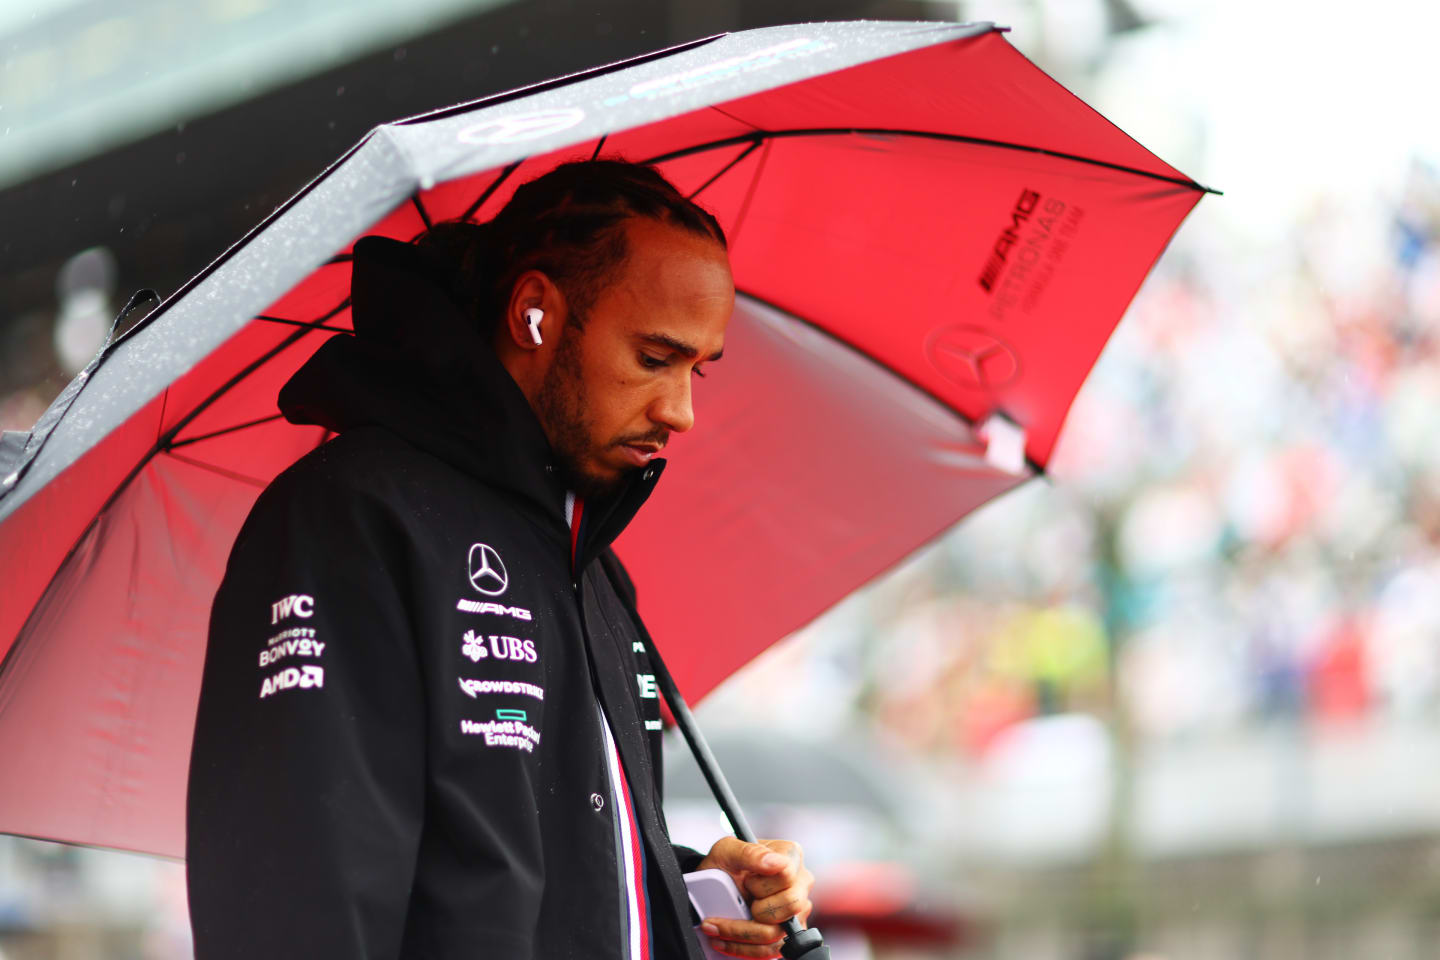 SUZUKA, JAPAN - OCTOBER 09: Lewis Hamilton of Great Britain and Mercedes looks on from the grid during the F1 Grand Prix of Japan at Suzuka International Racing Course on October 09, 2022 in Suzuka, Japan. (Photo by Dan Istitene - Formula 1/Formula 1 via Getty Images)